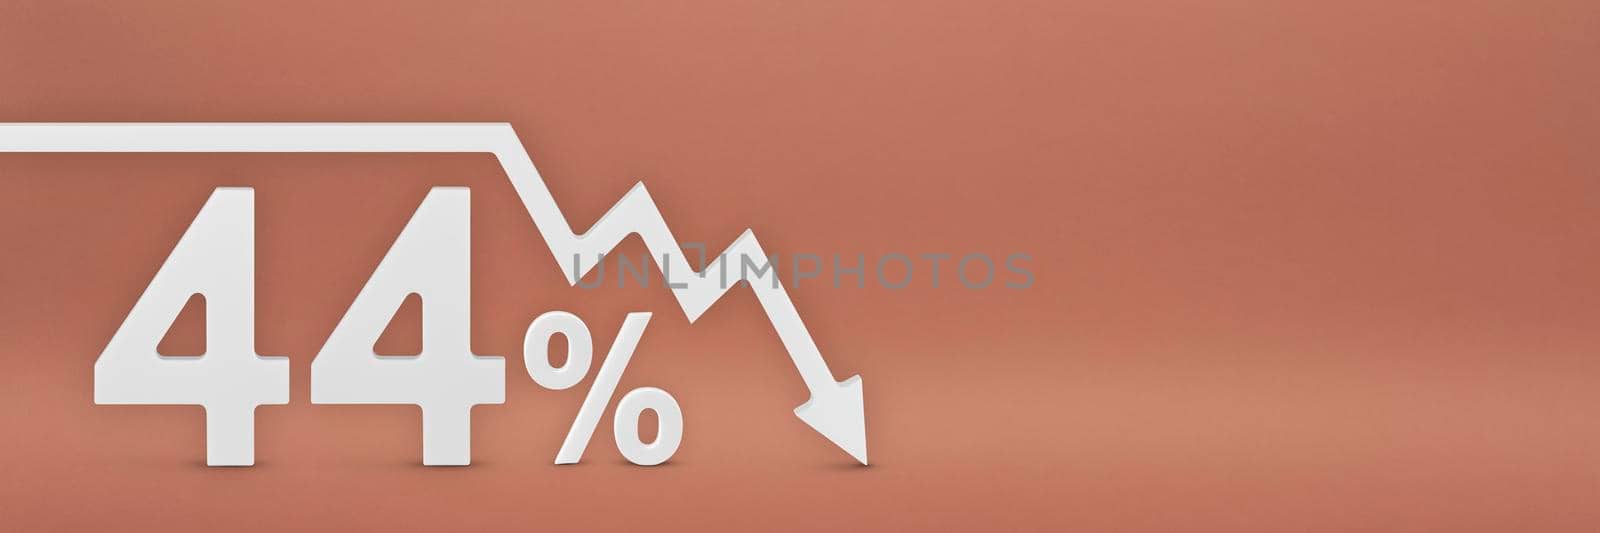 forty-four percent, the arrow on the graph is pointing down. Stock market crash, bear market, inflation.Economic collapse, collapse of stocks.3d banner,44 percent discount sign on a red background